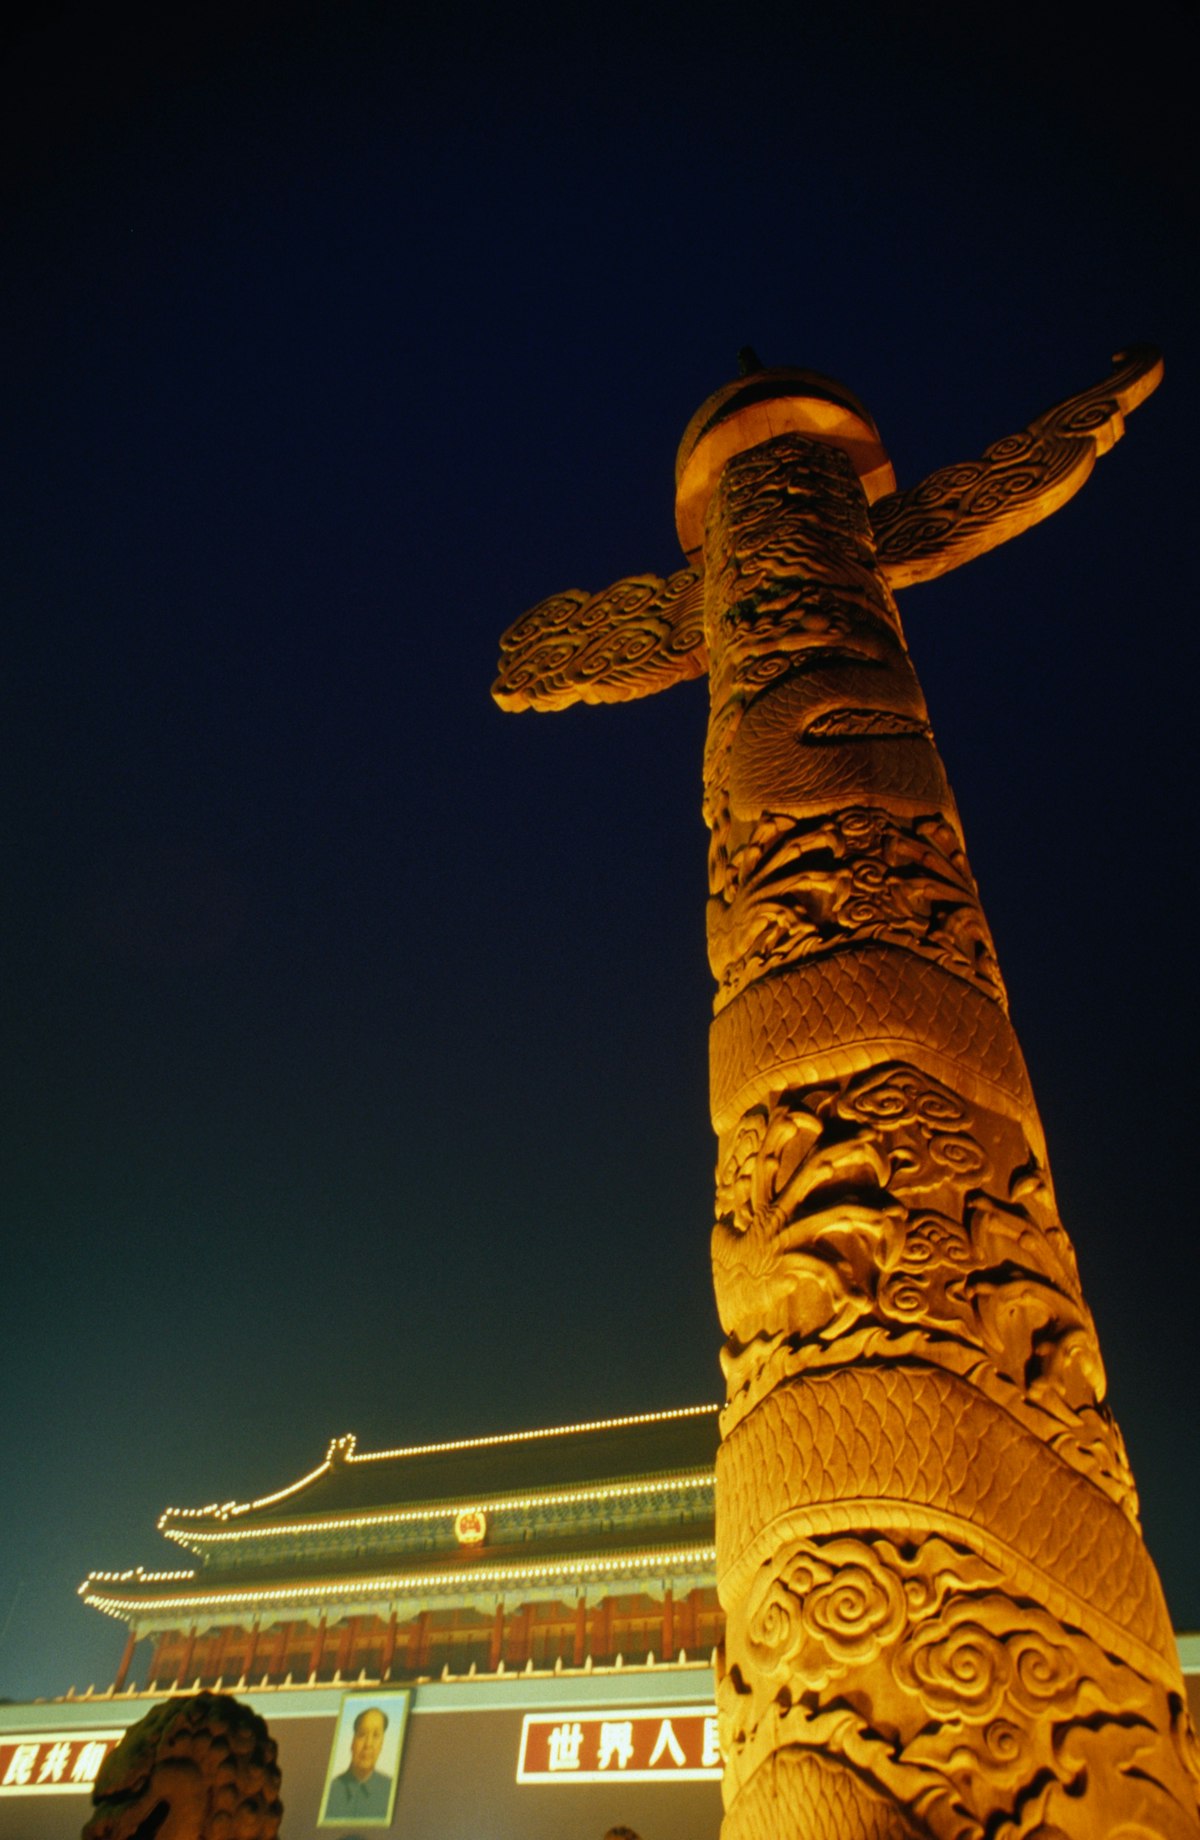 Sculpted column in front of Gate of Heavenly Peace.